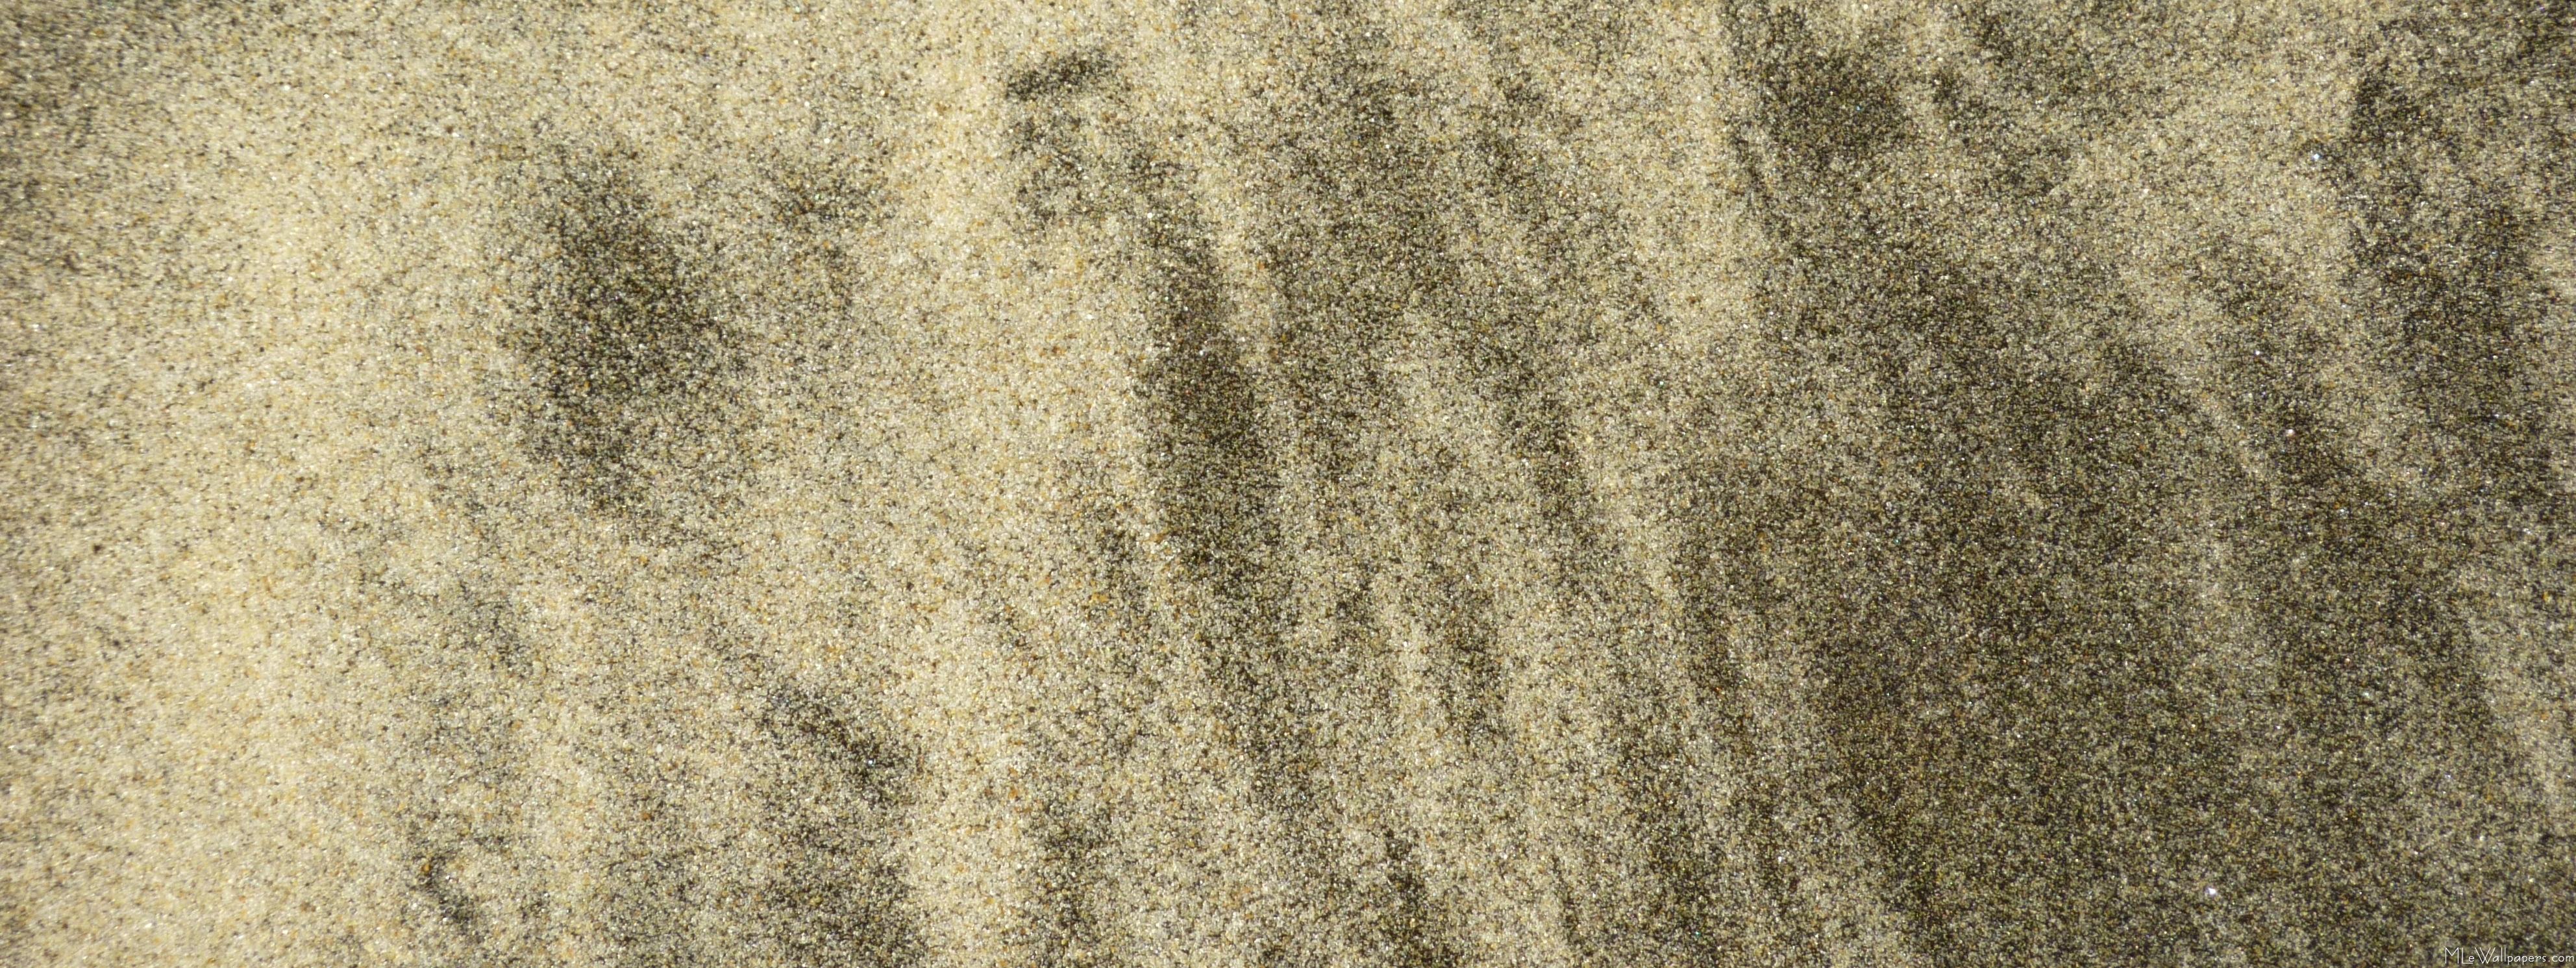 MLeWallpapers.com - Black and White Sand